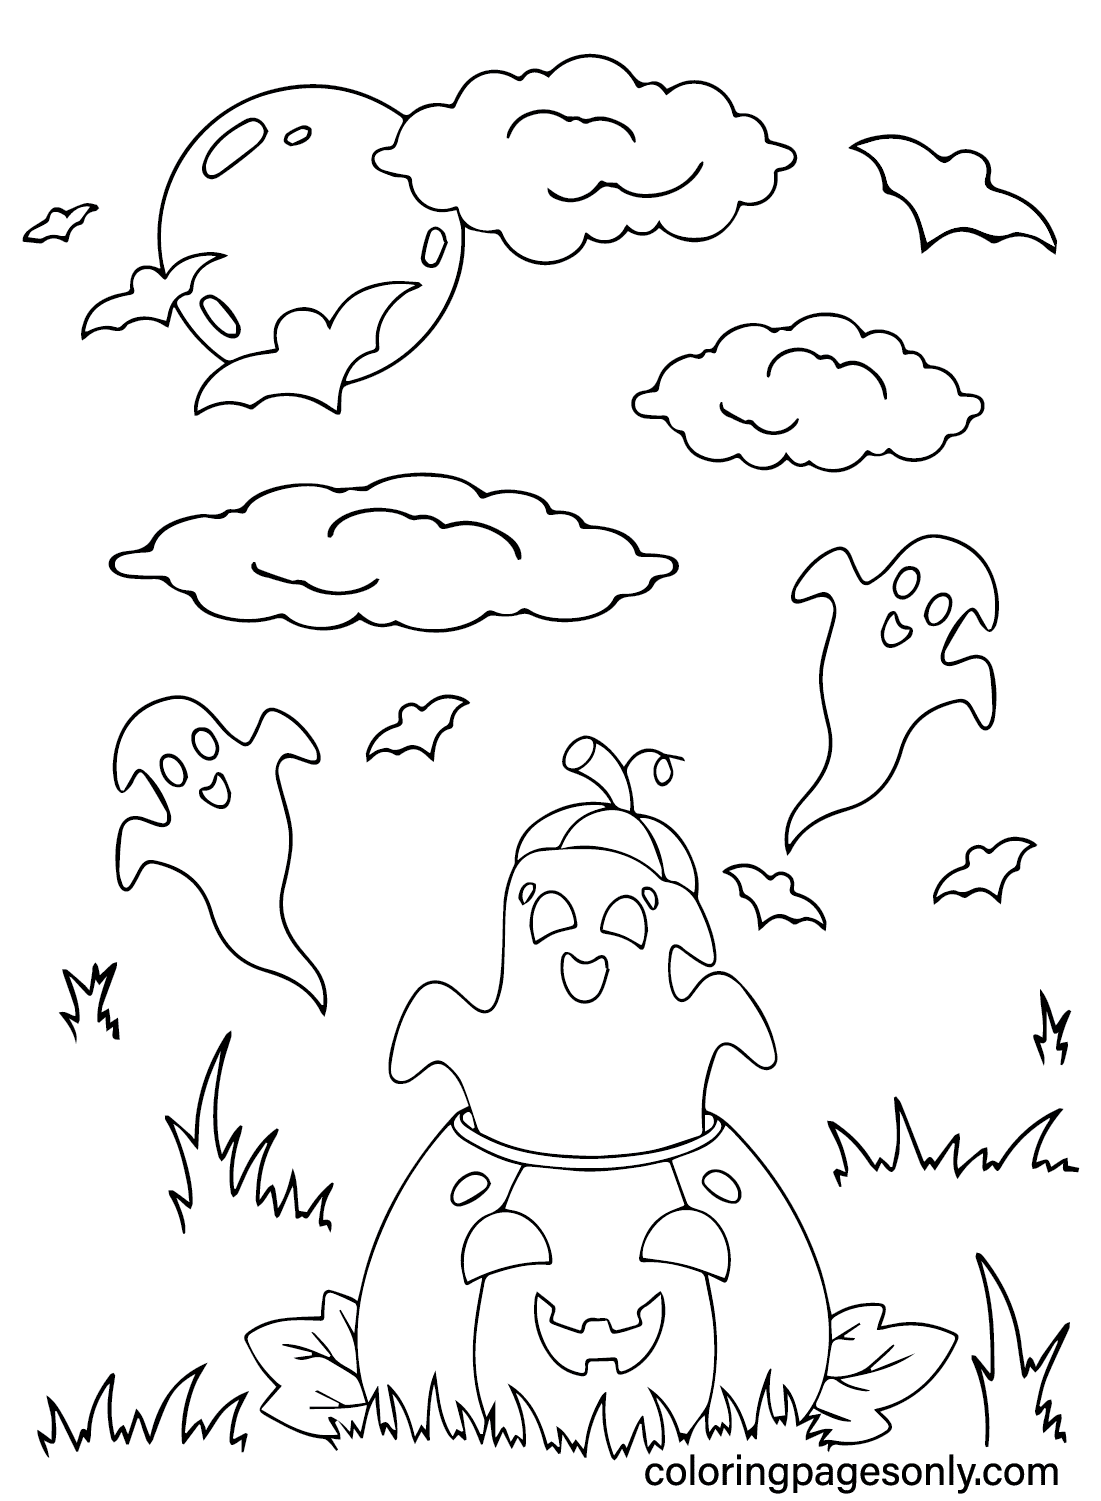 Cute Halloween Coloring Sheet for Kids